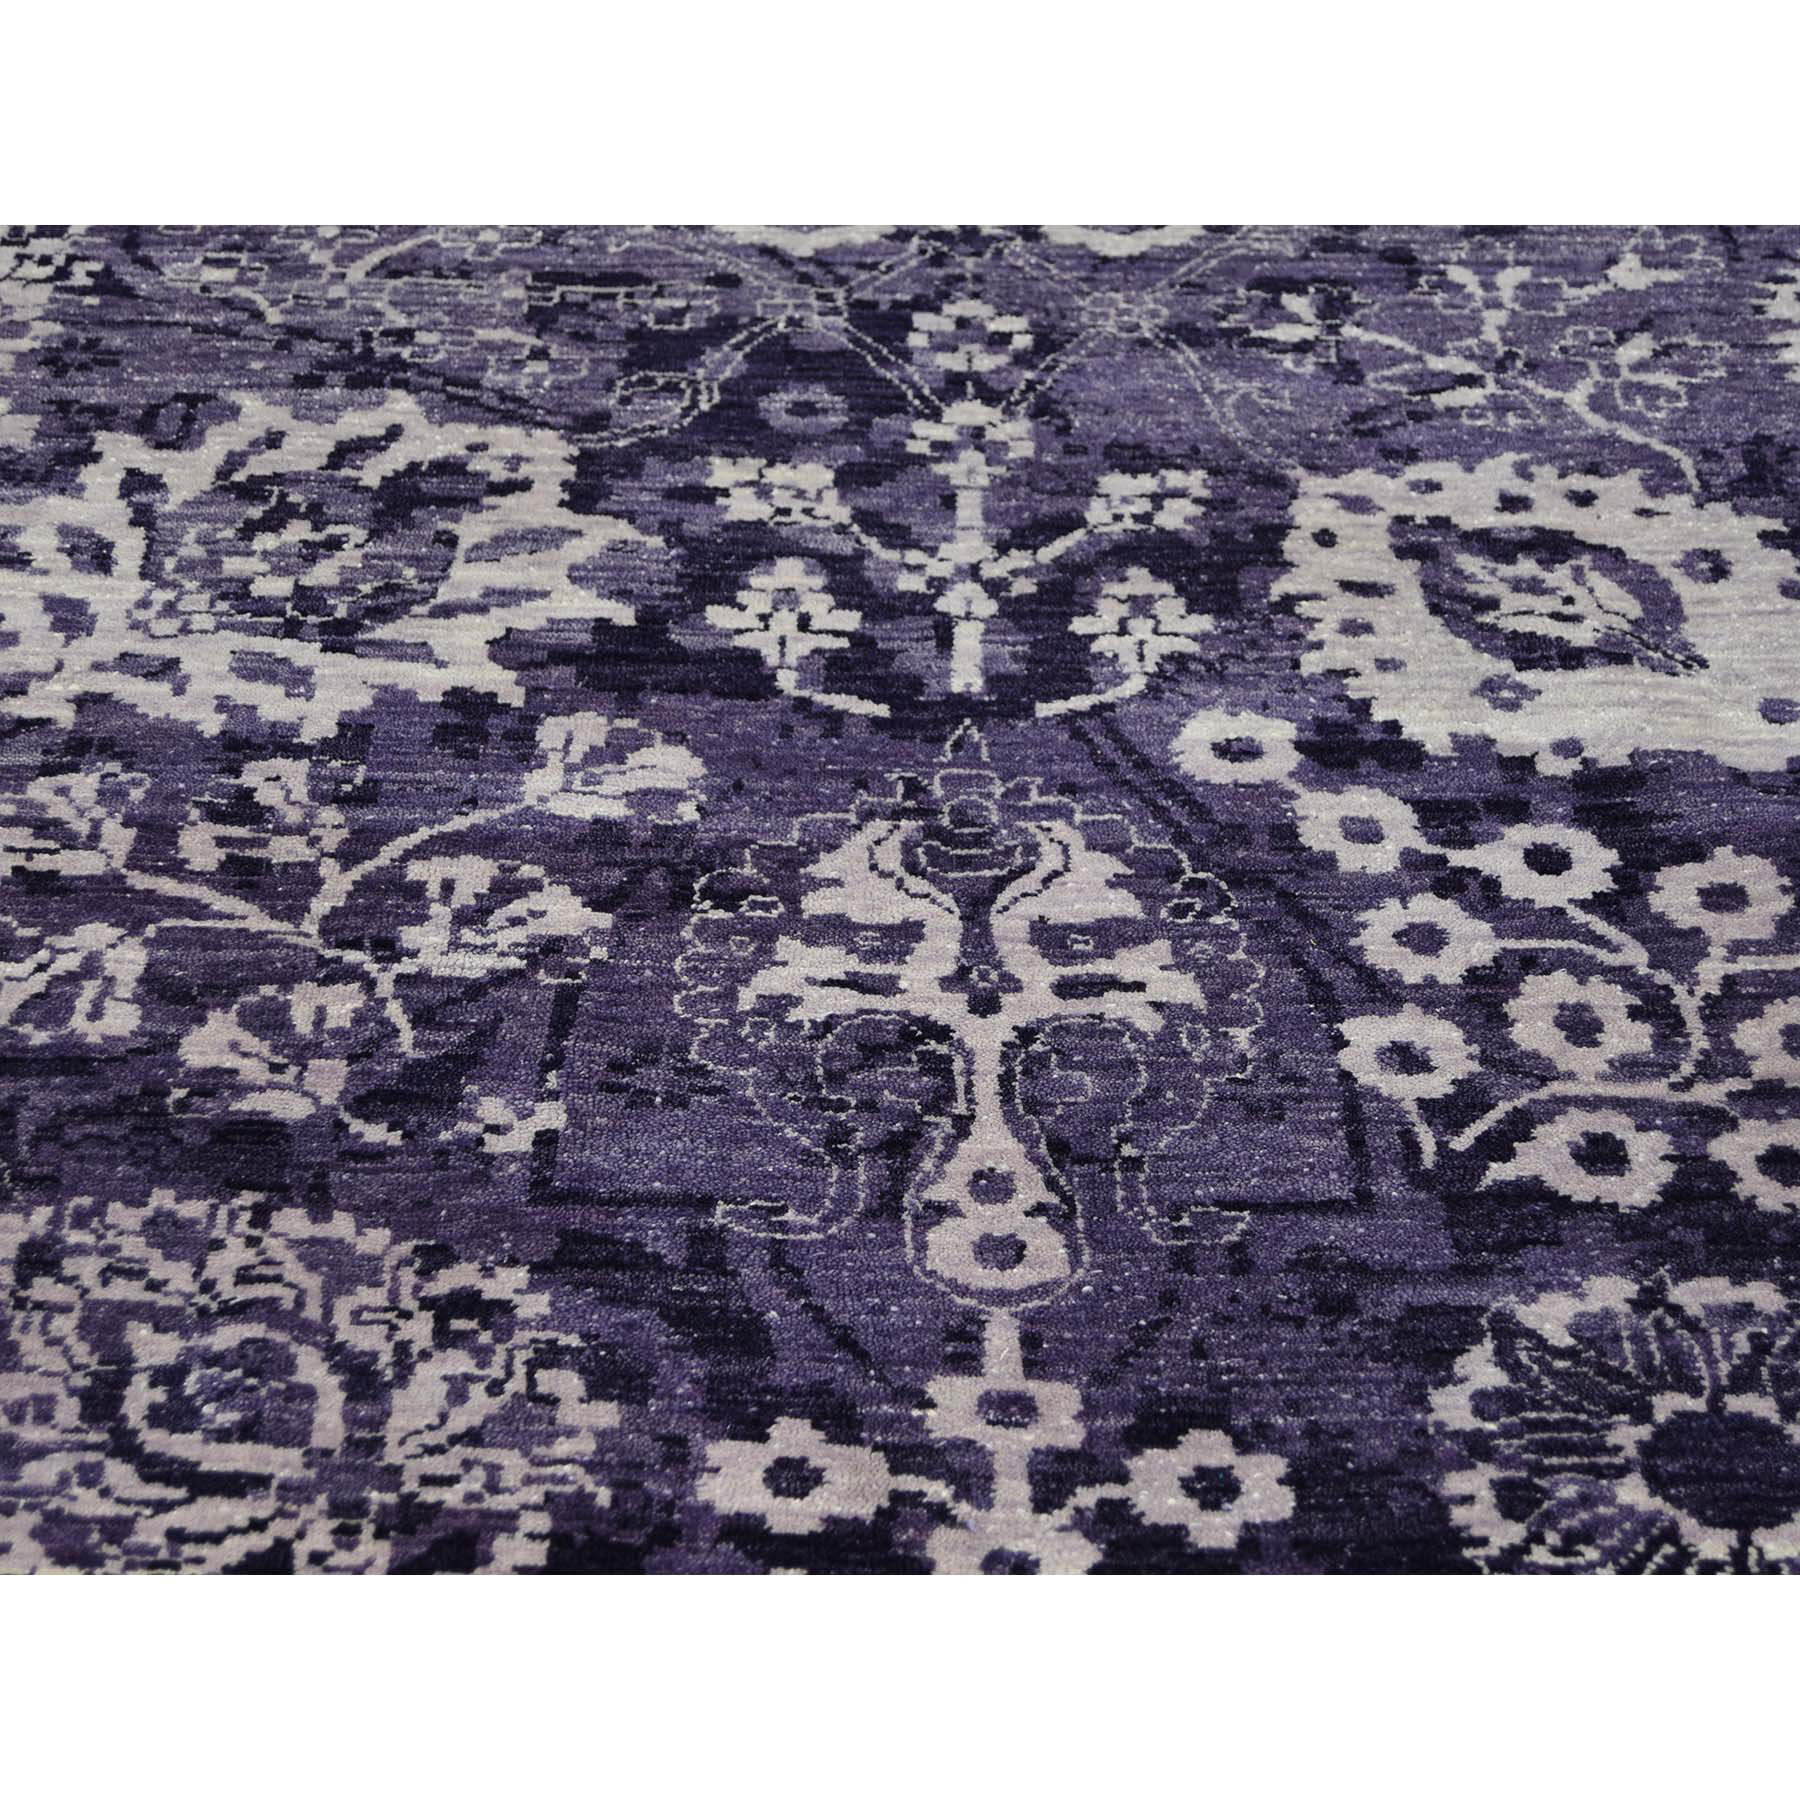 9-x12- Purple Wool And Silk Hand-Knotted Tone on Tone Tabriz Rug 